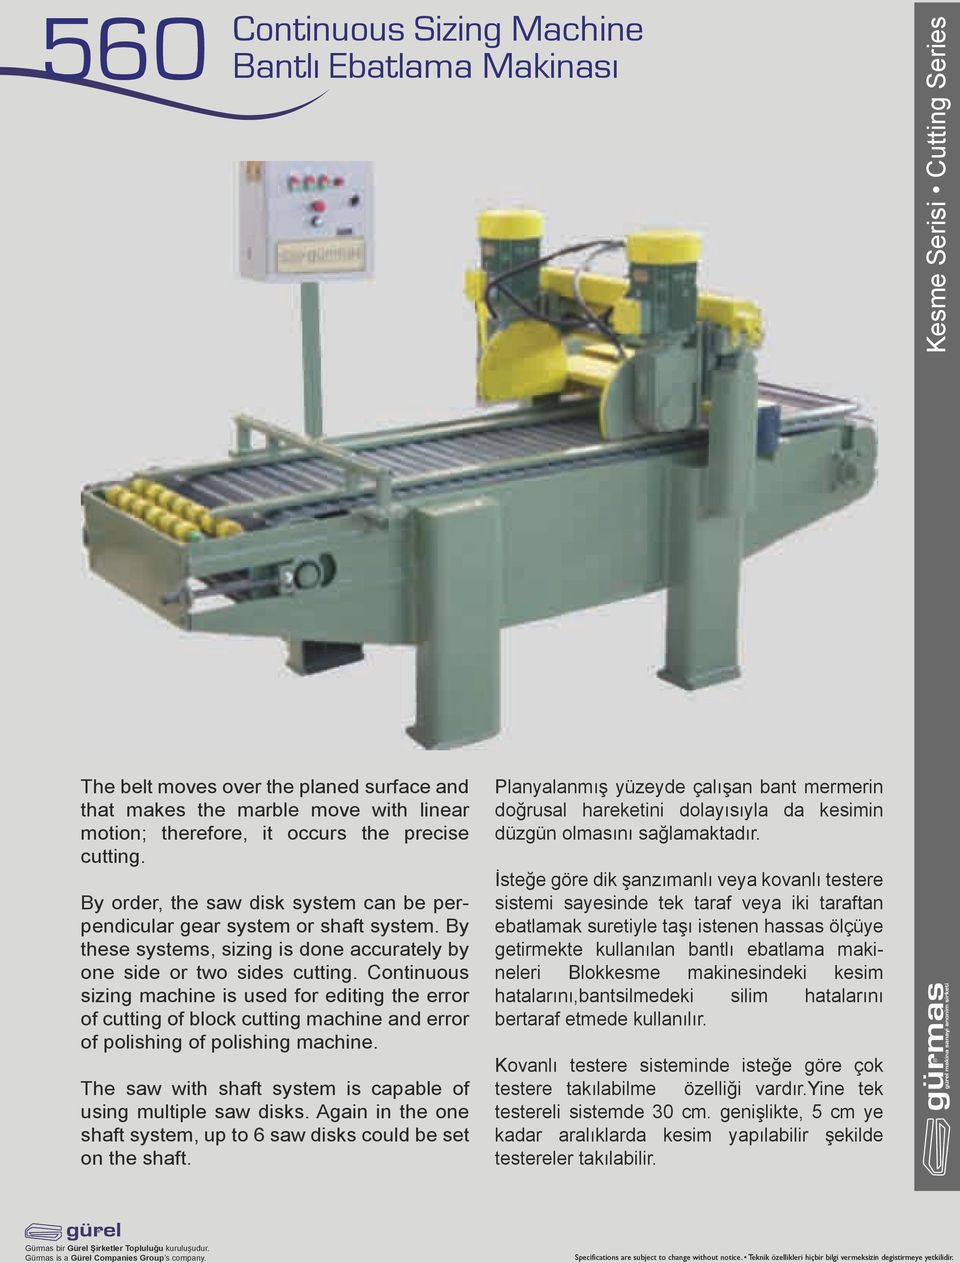 Continuous sizing machine is used for editing the error of cutting of block cutting machine and error of polishing of polishing machine.